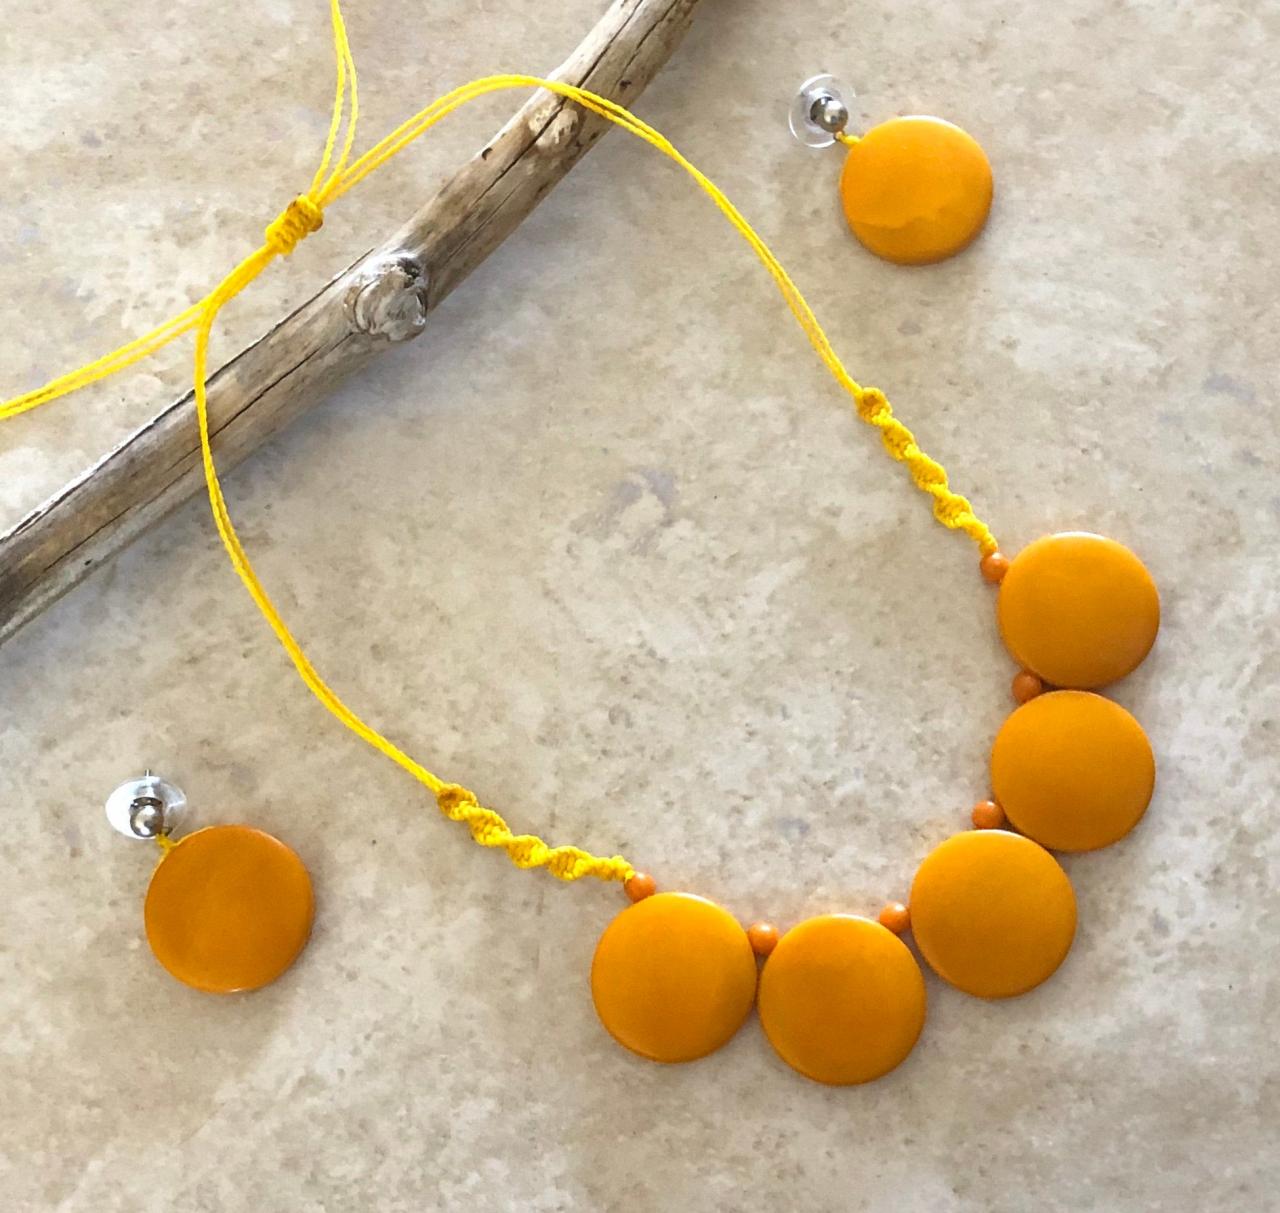 Amber Necklace And Earrings, Round Shape Necklace, Minimalist Necklace, Geometric Necklace , Adjustable Neck, Vegan Neck, Seeds Necklace